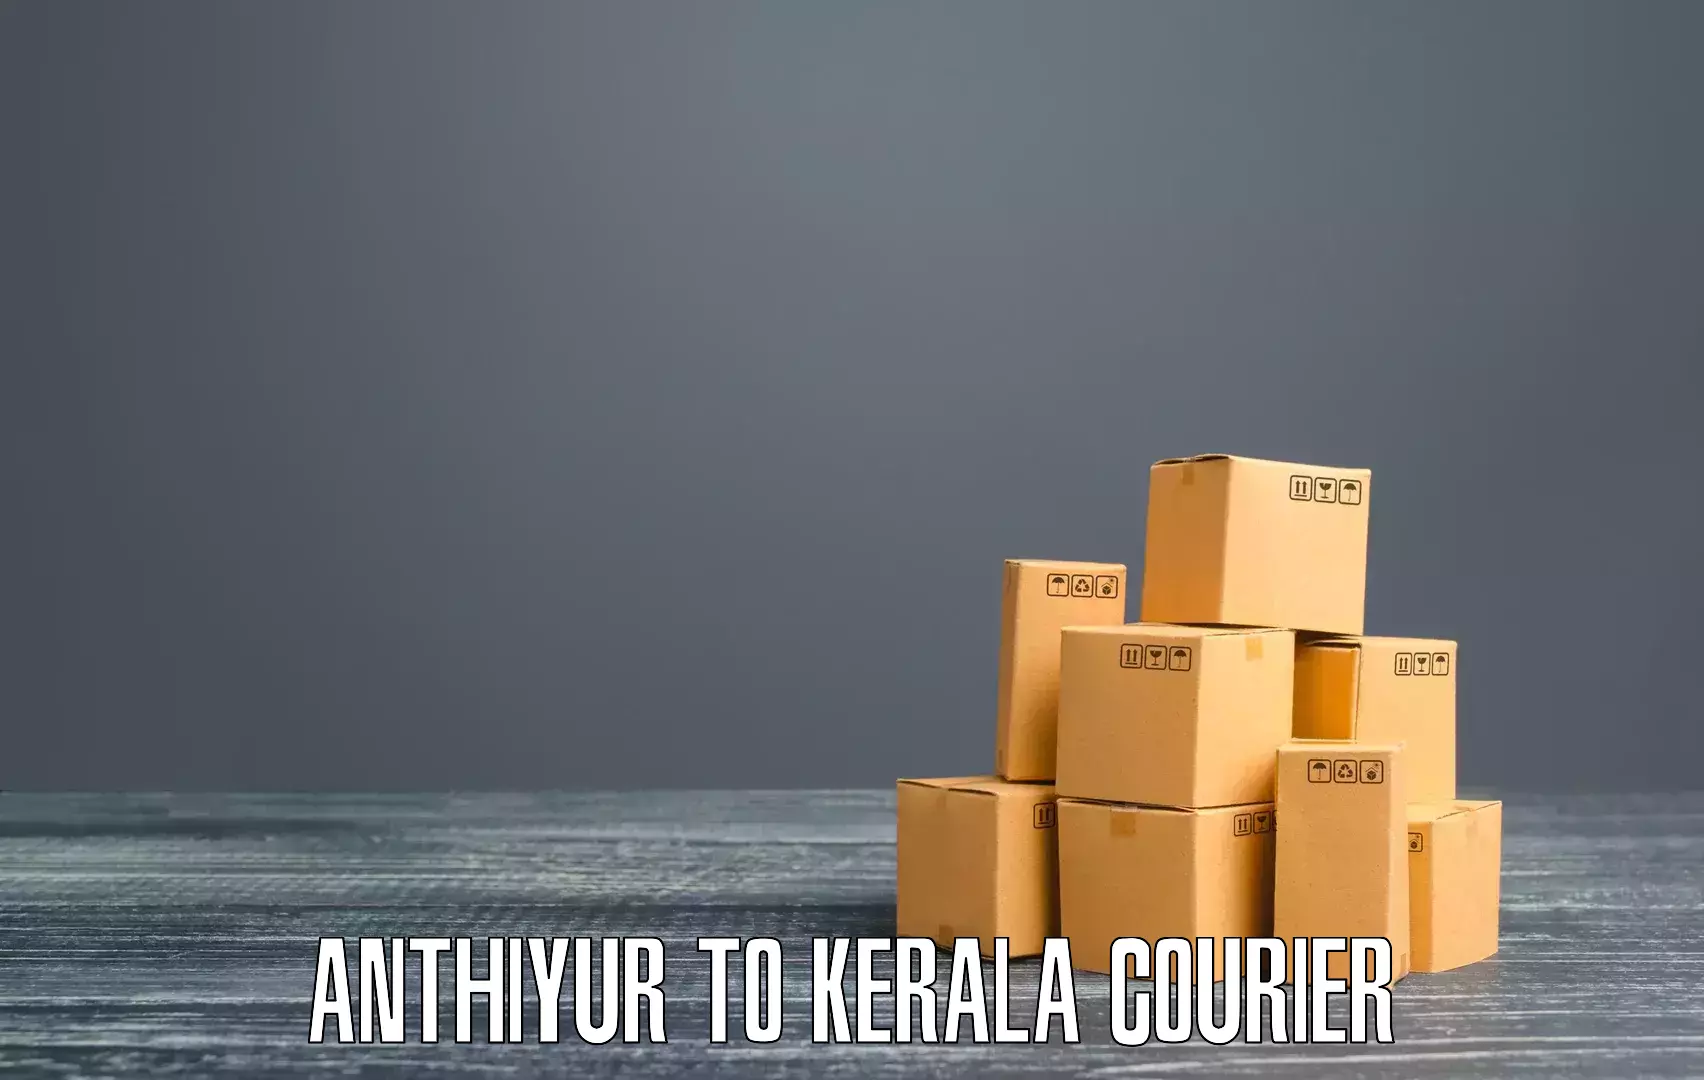 Courier service innovation Anthiyur to Cochin University of Science and Technology